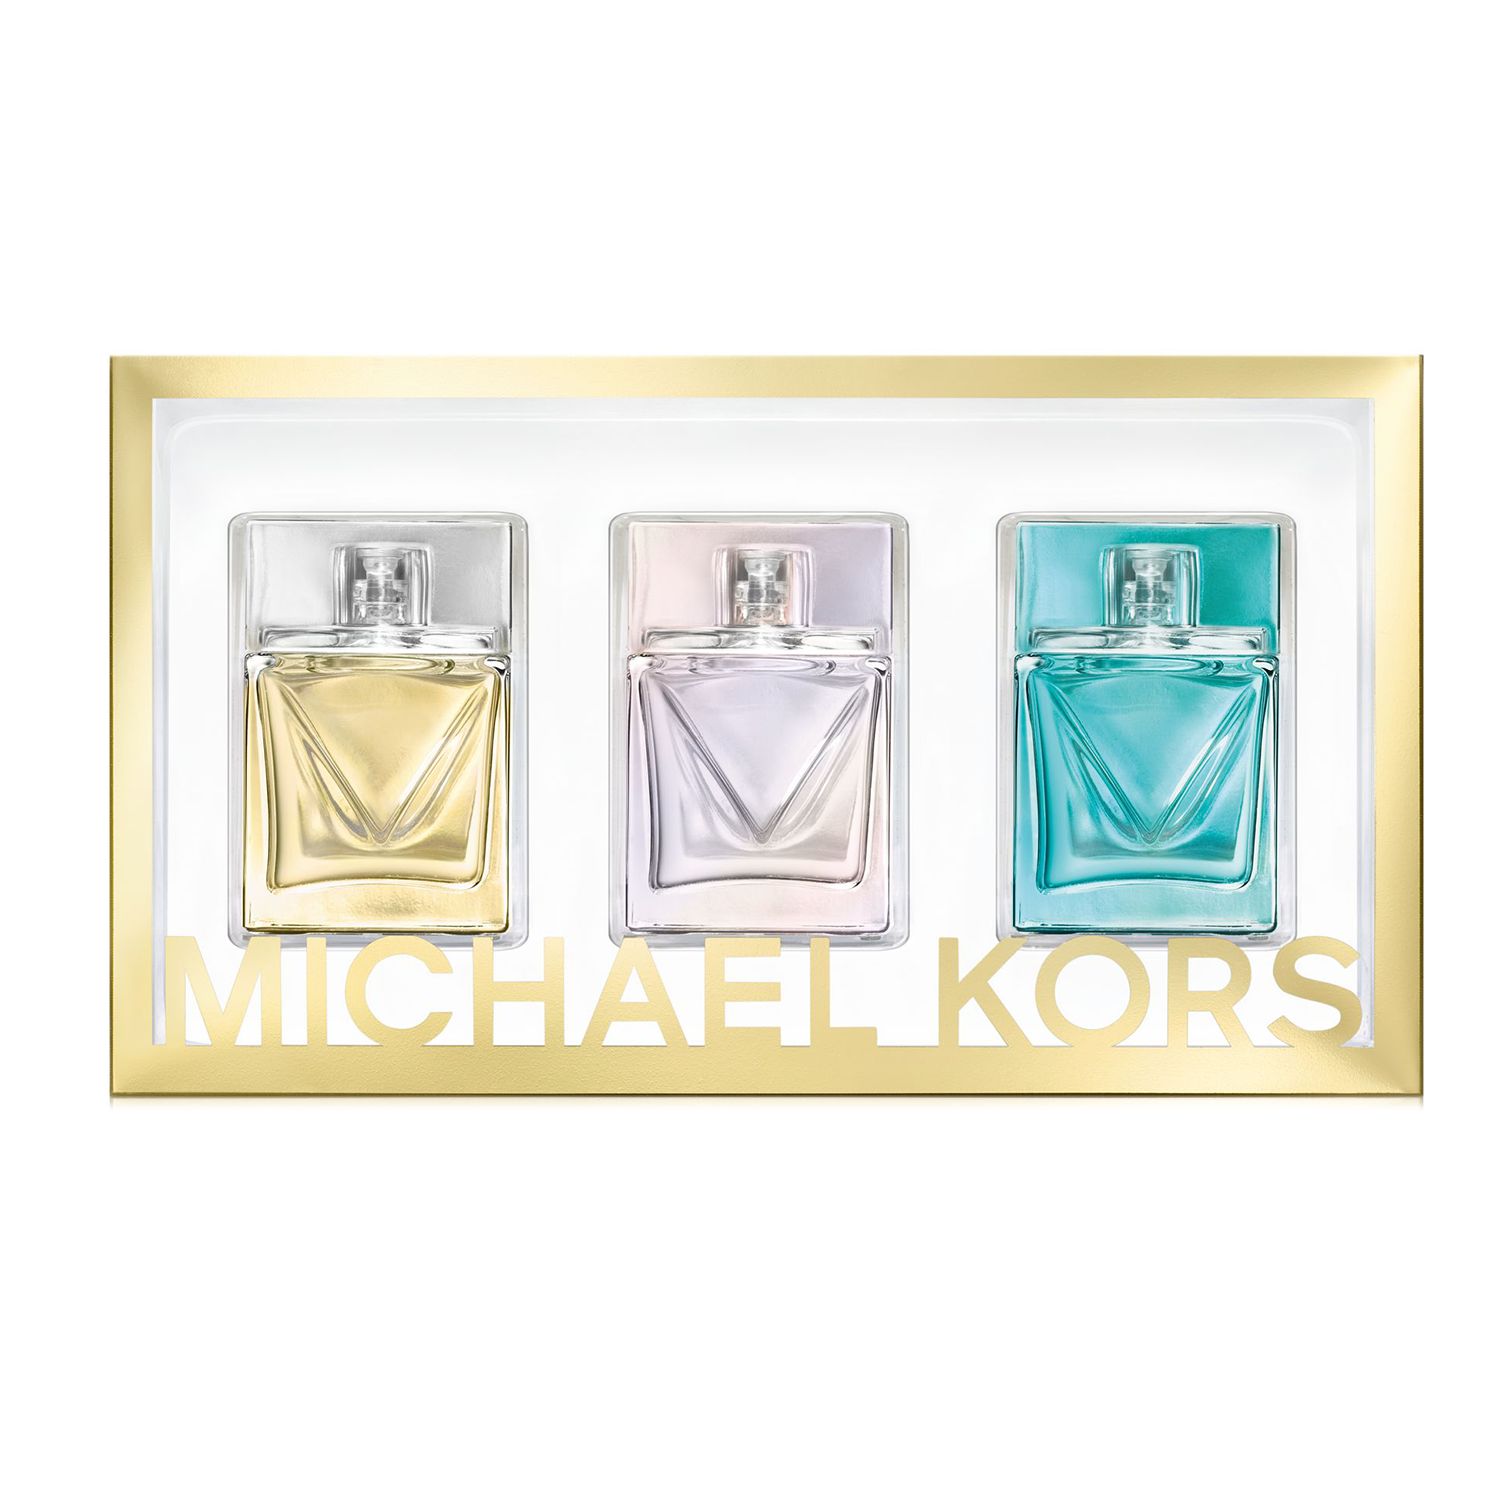 Ælte Midler For det andet michael kors turquoise perfume Cheaper Than Retail Price> Buy Clothing,  Accessories and lifestyle products for women & men -